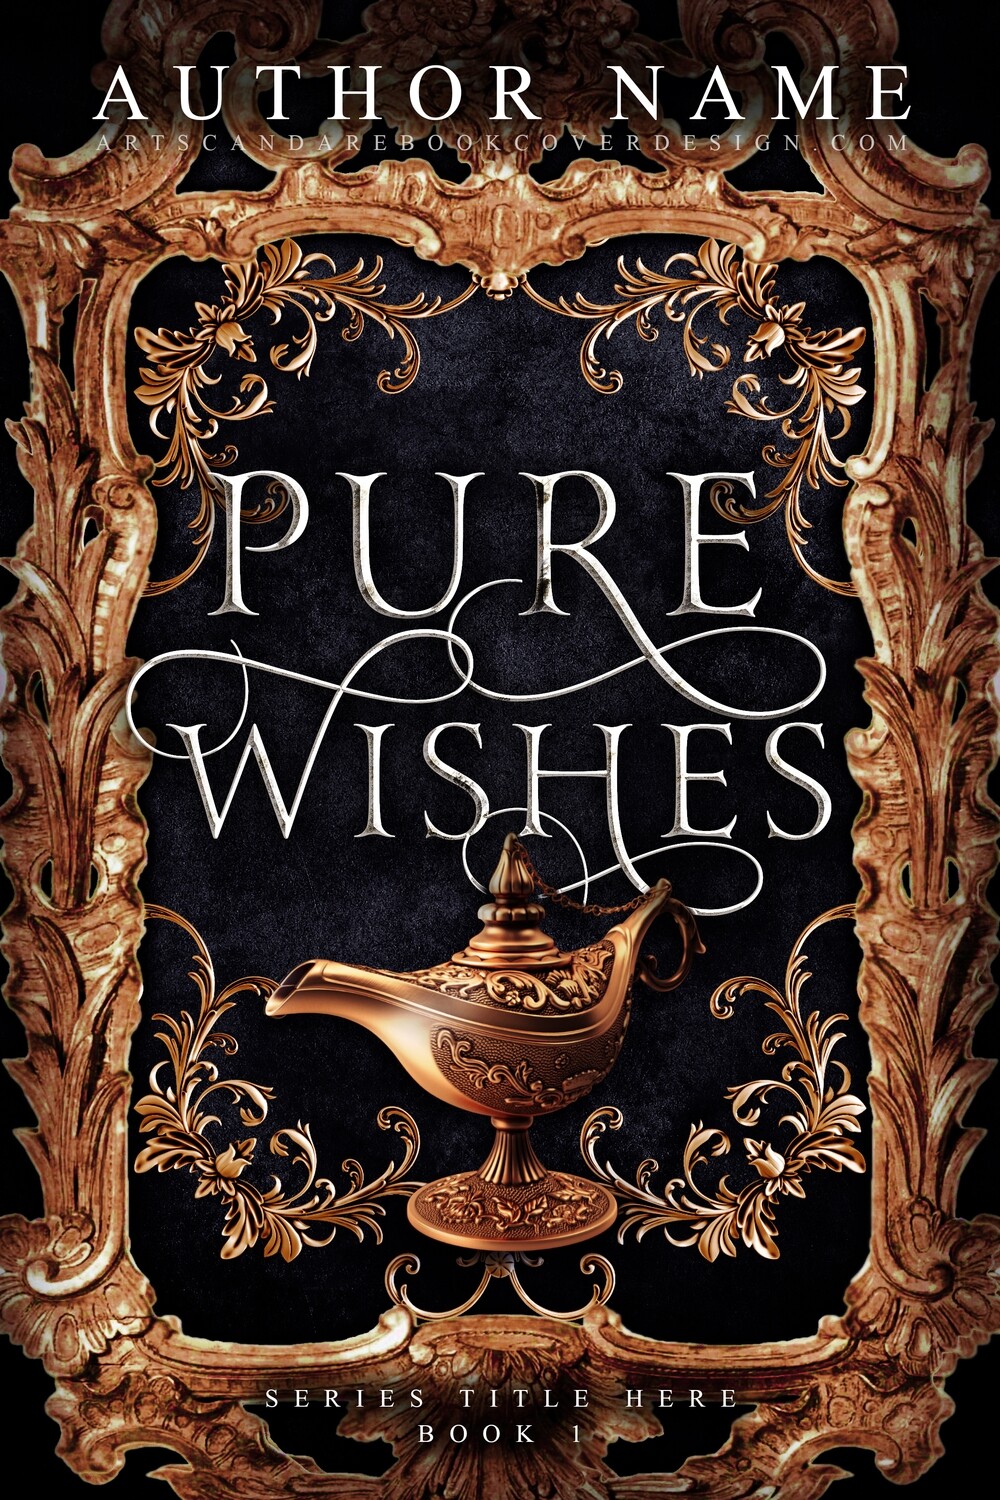 PURE WISHES